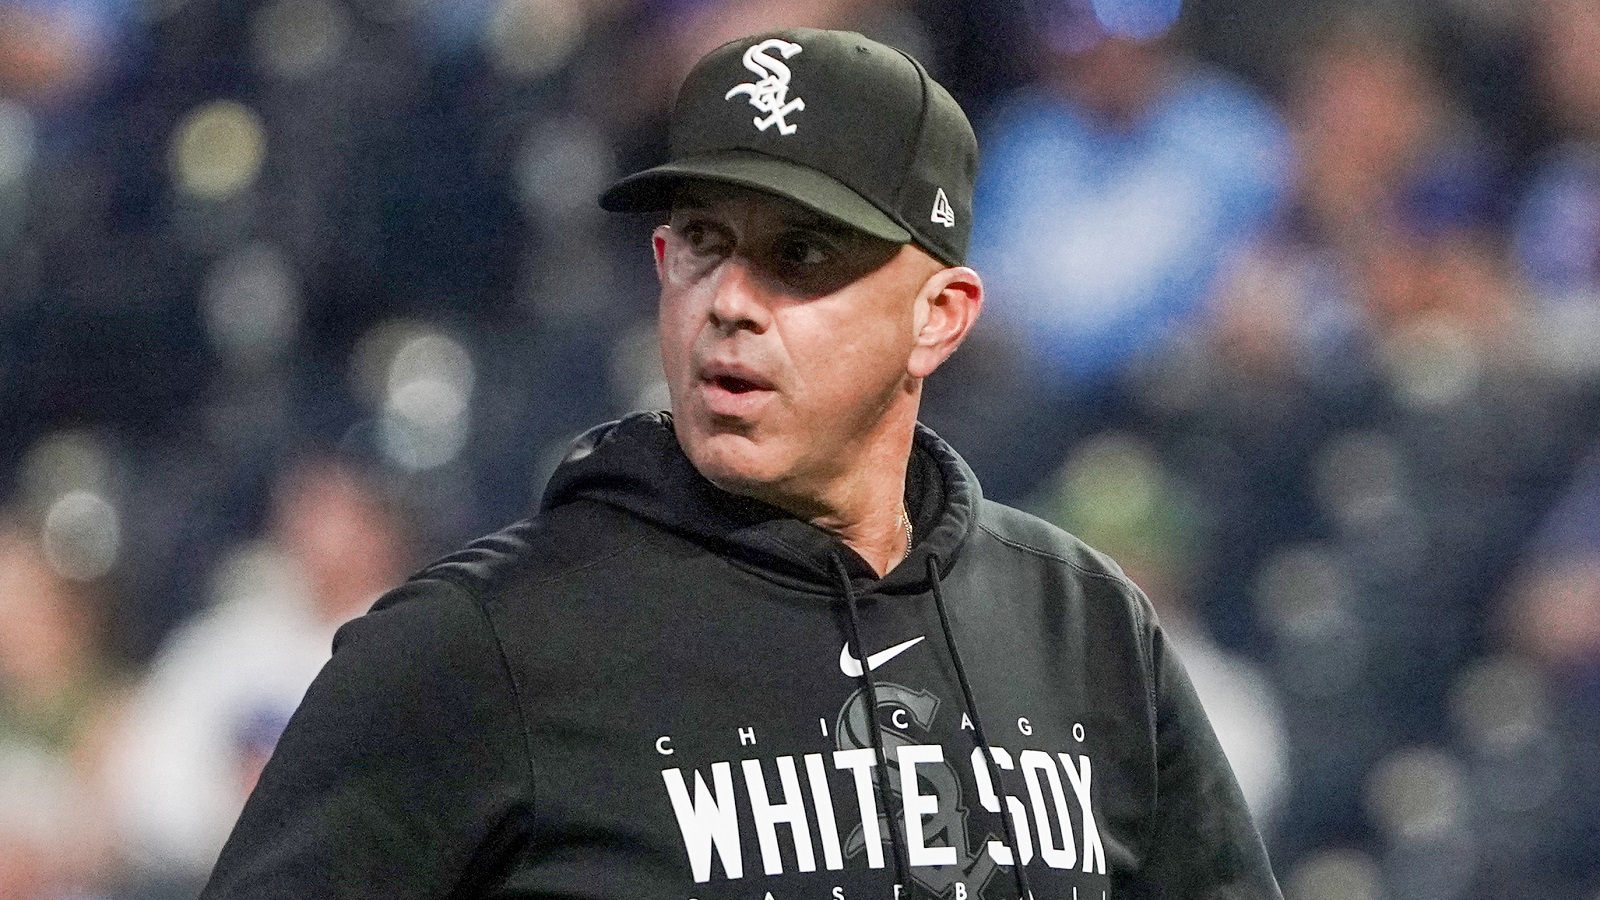 Pedro Grifol named White Sox manager